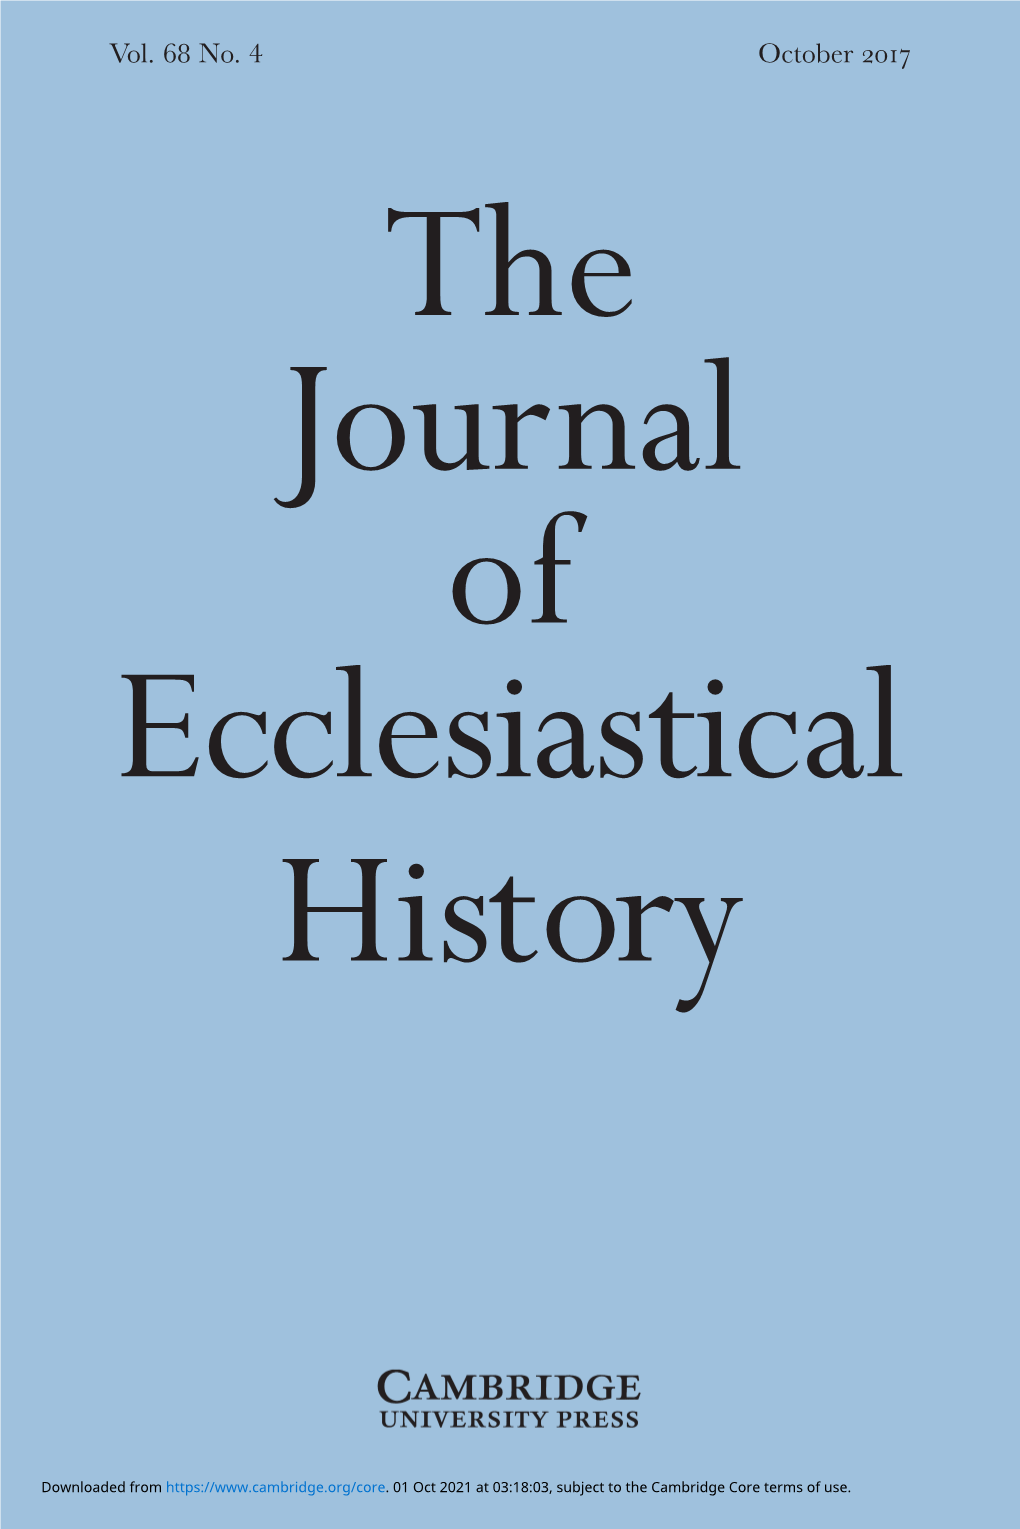 T He Journal of Ecclesiastical History